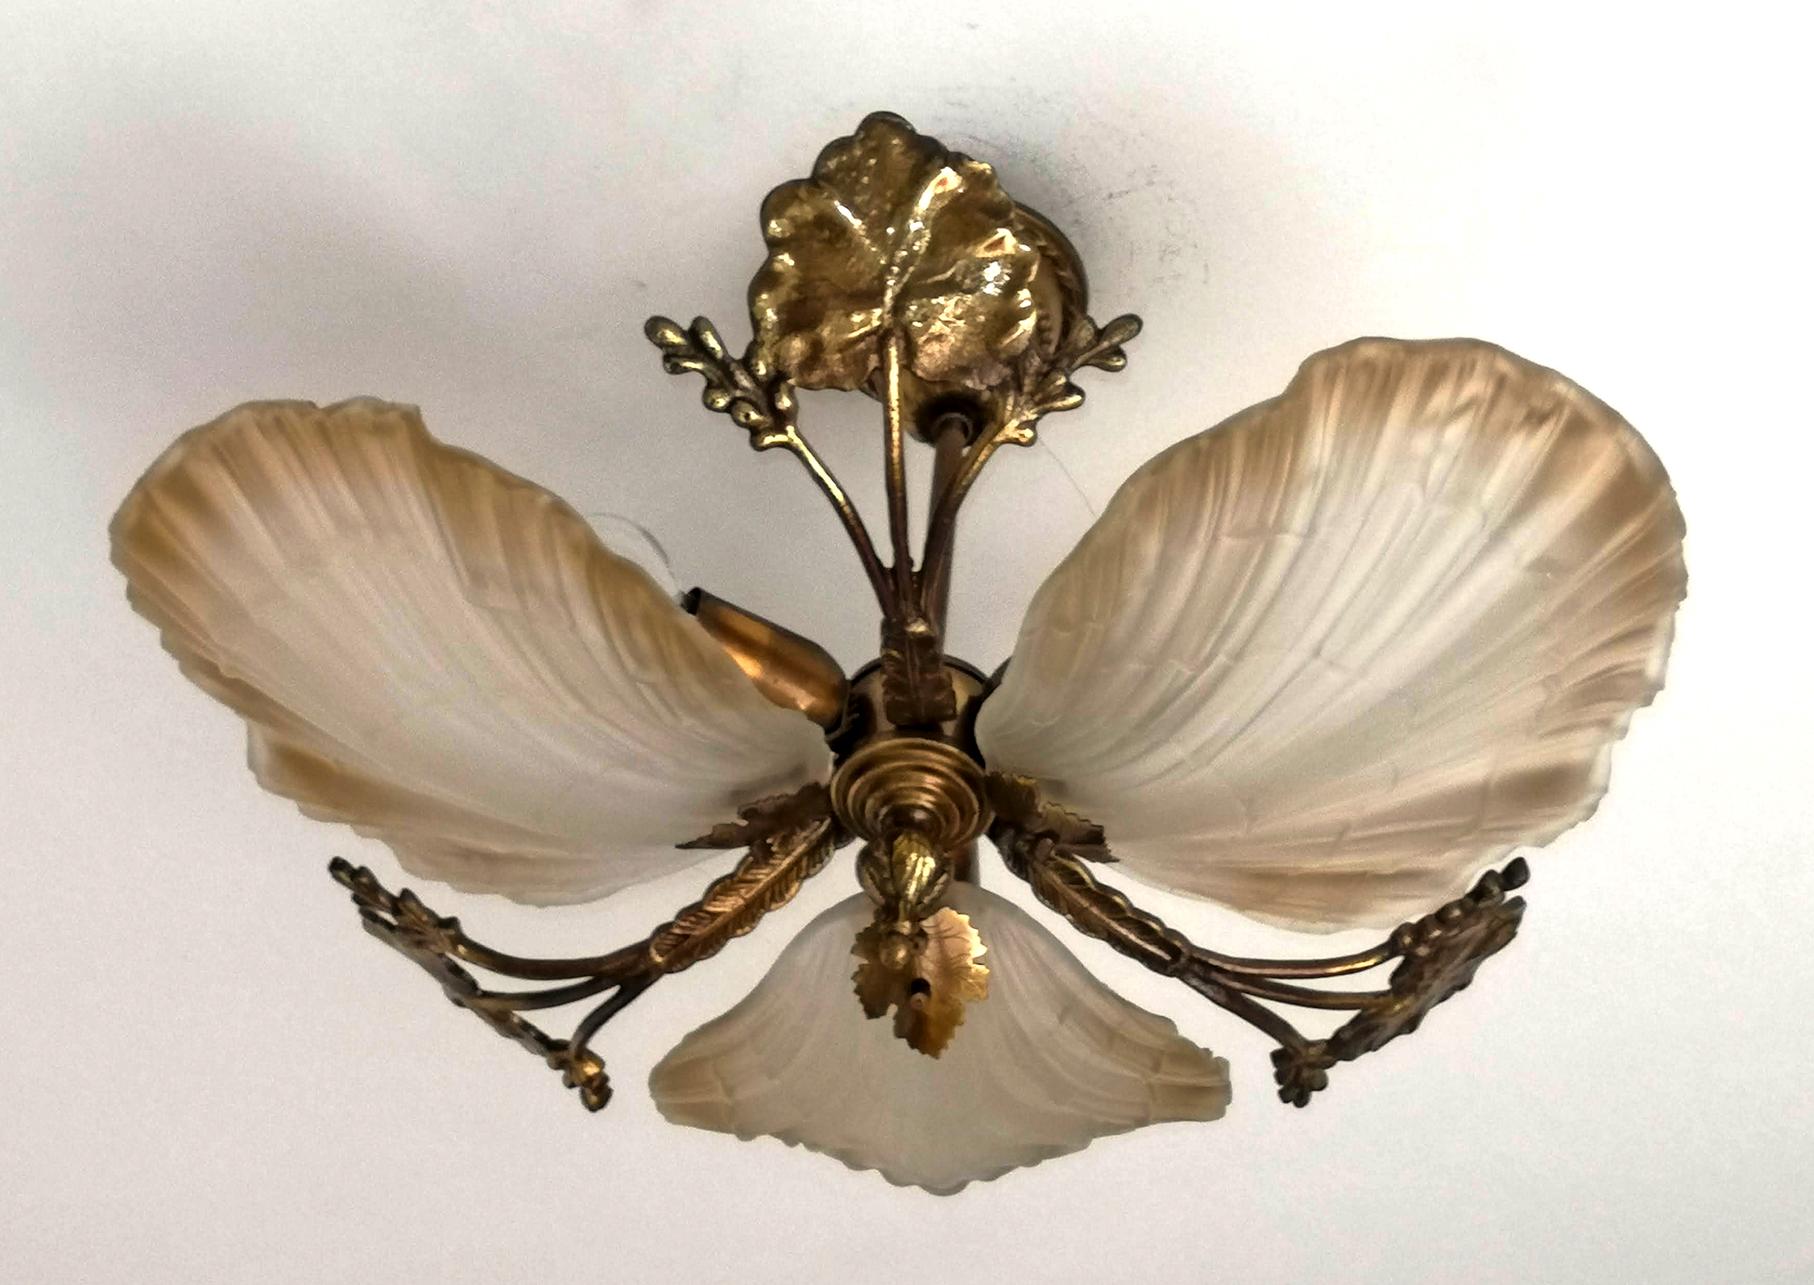 French Art Nouveau Hollywood Regency Chandelier, Gilt Bronze and Amber Glass 1